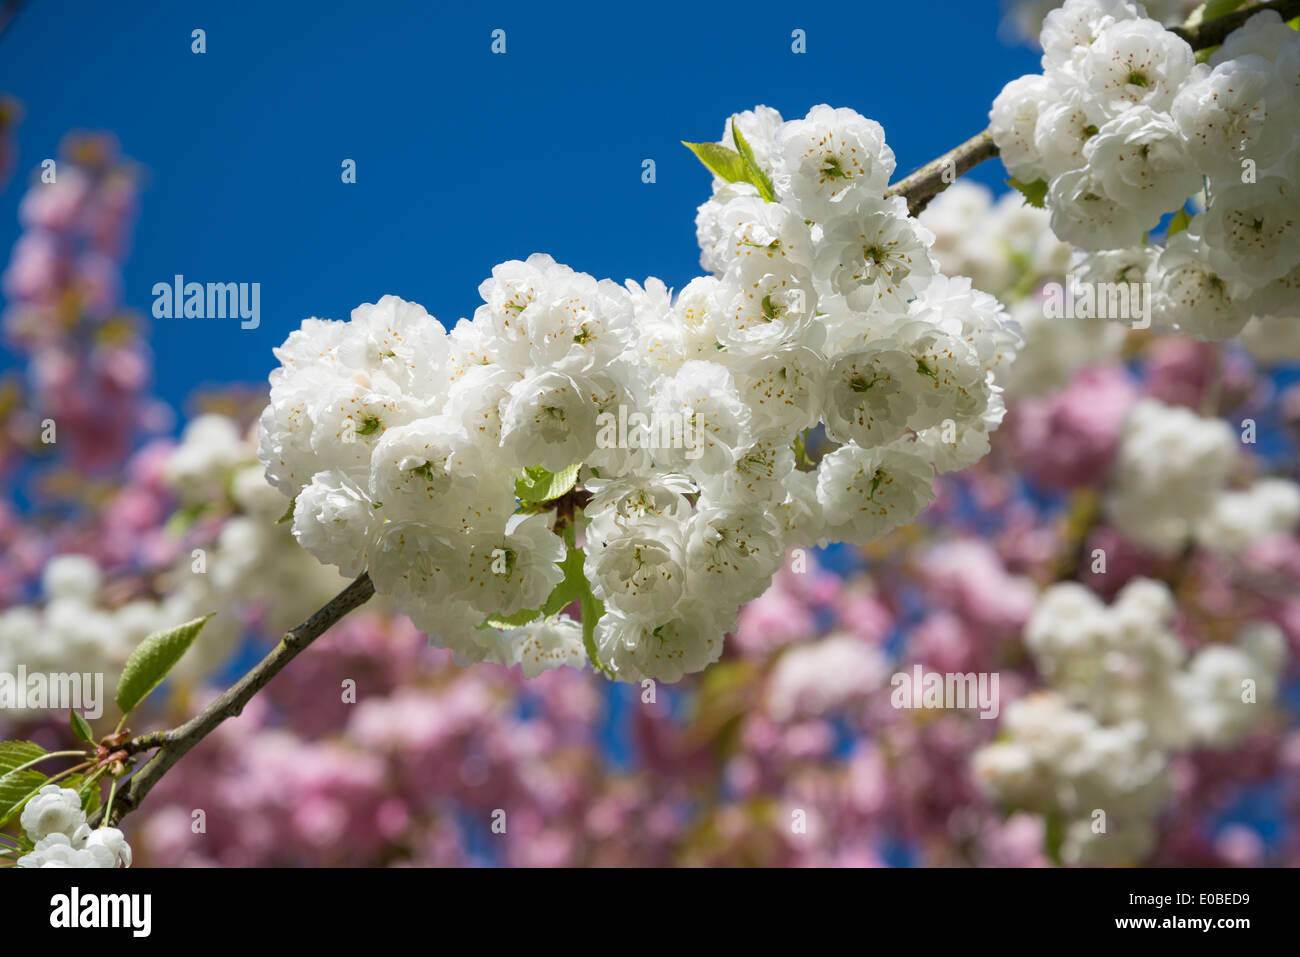 White and pink spring blossom, apple and cherry blossom Stock Photo